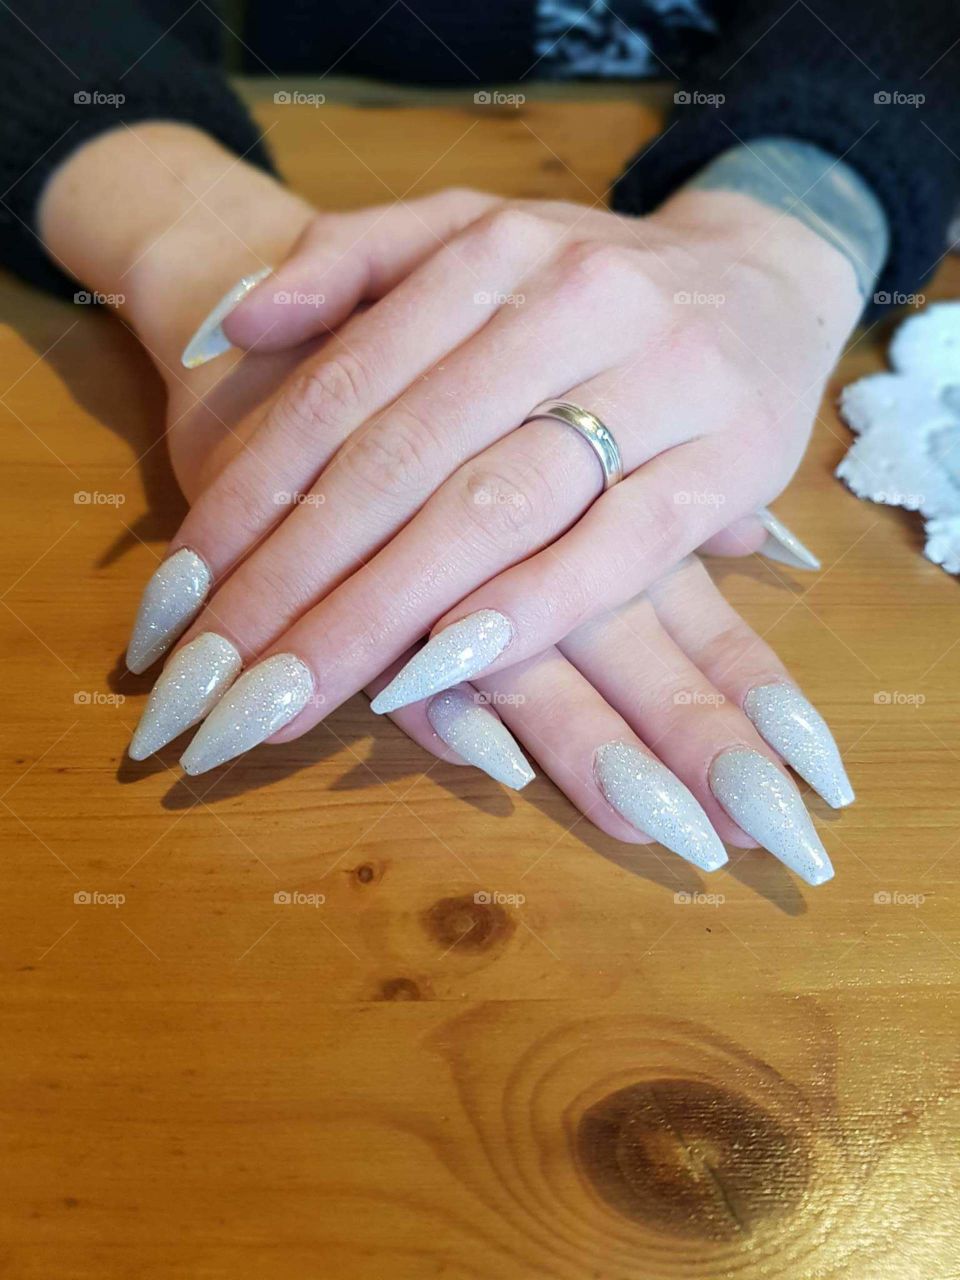 Nails made by me